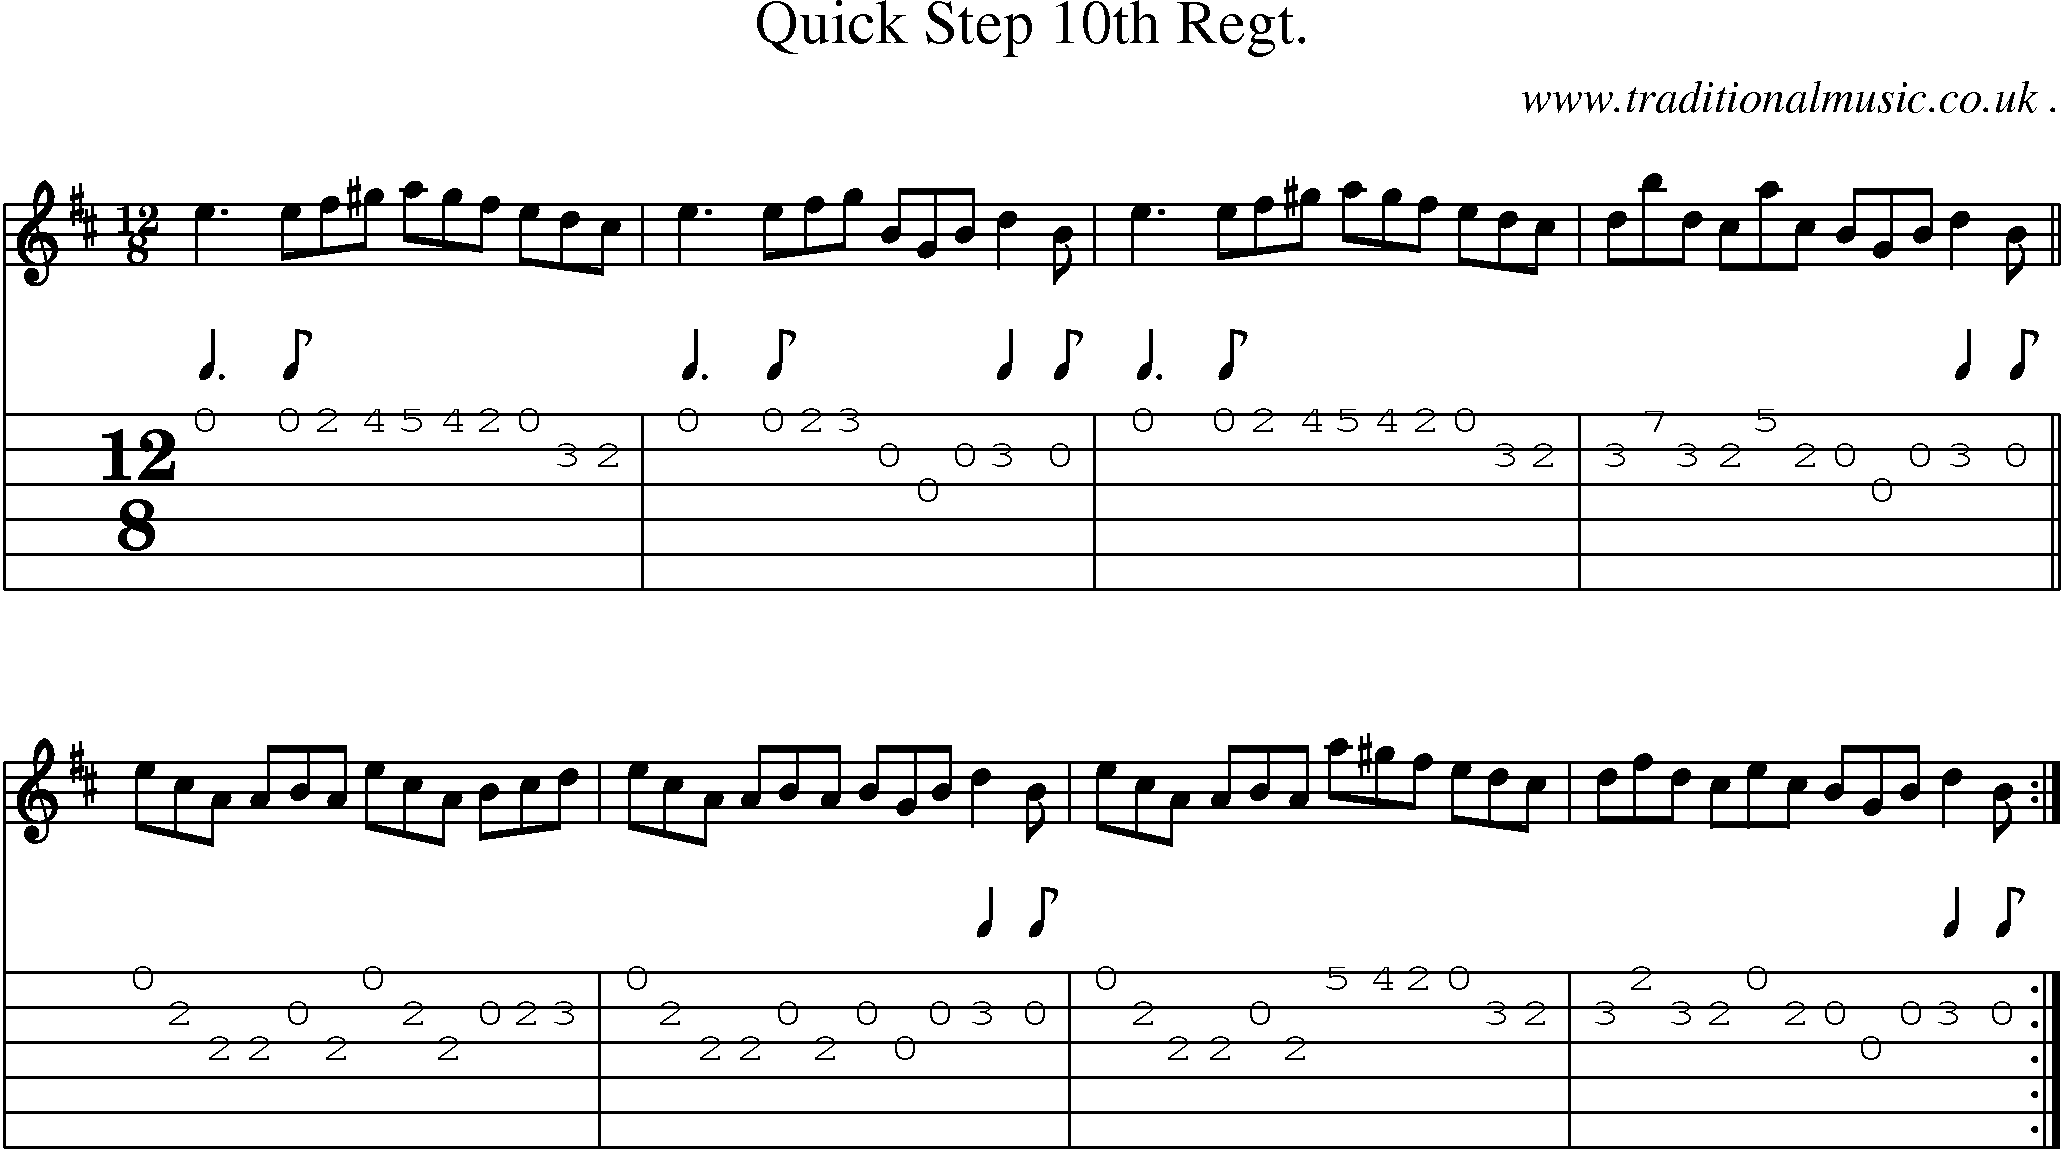 Sheet-Music and Guitar Tabs for Quick Step 10th Regt